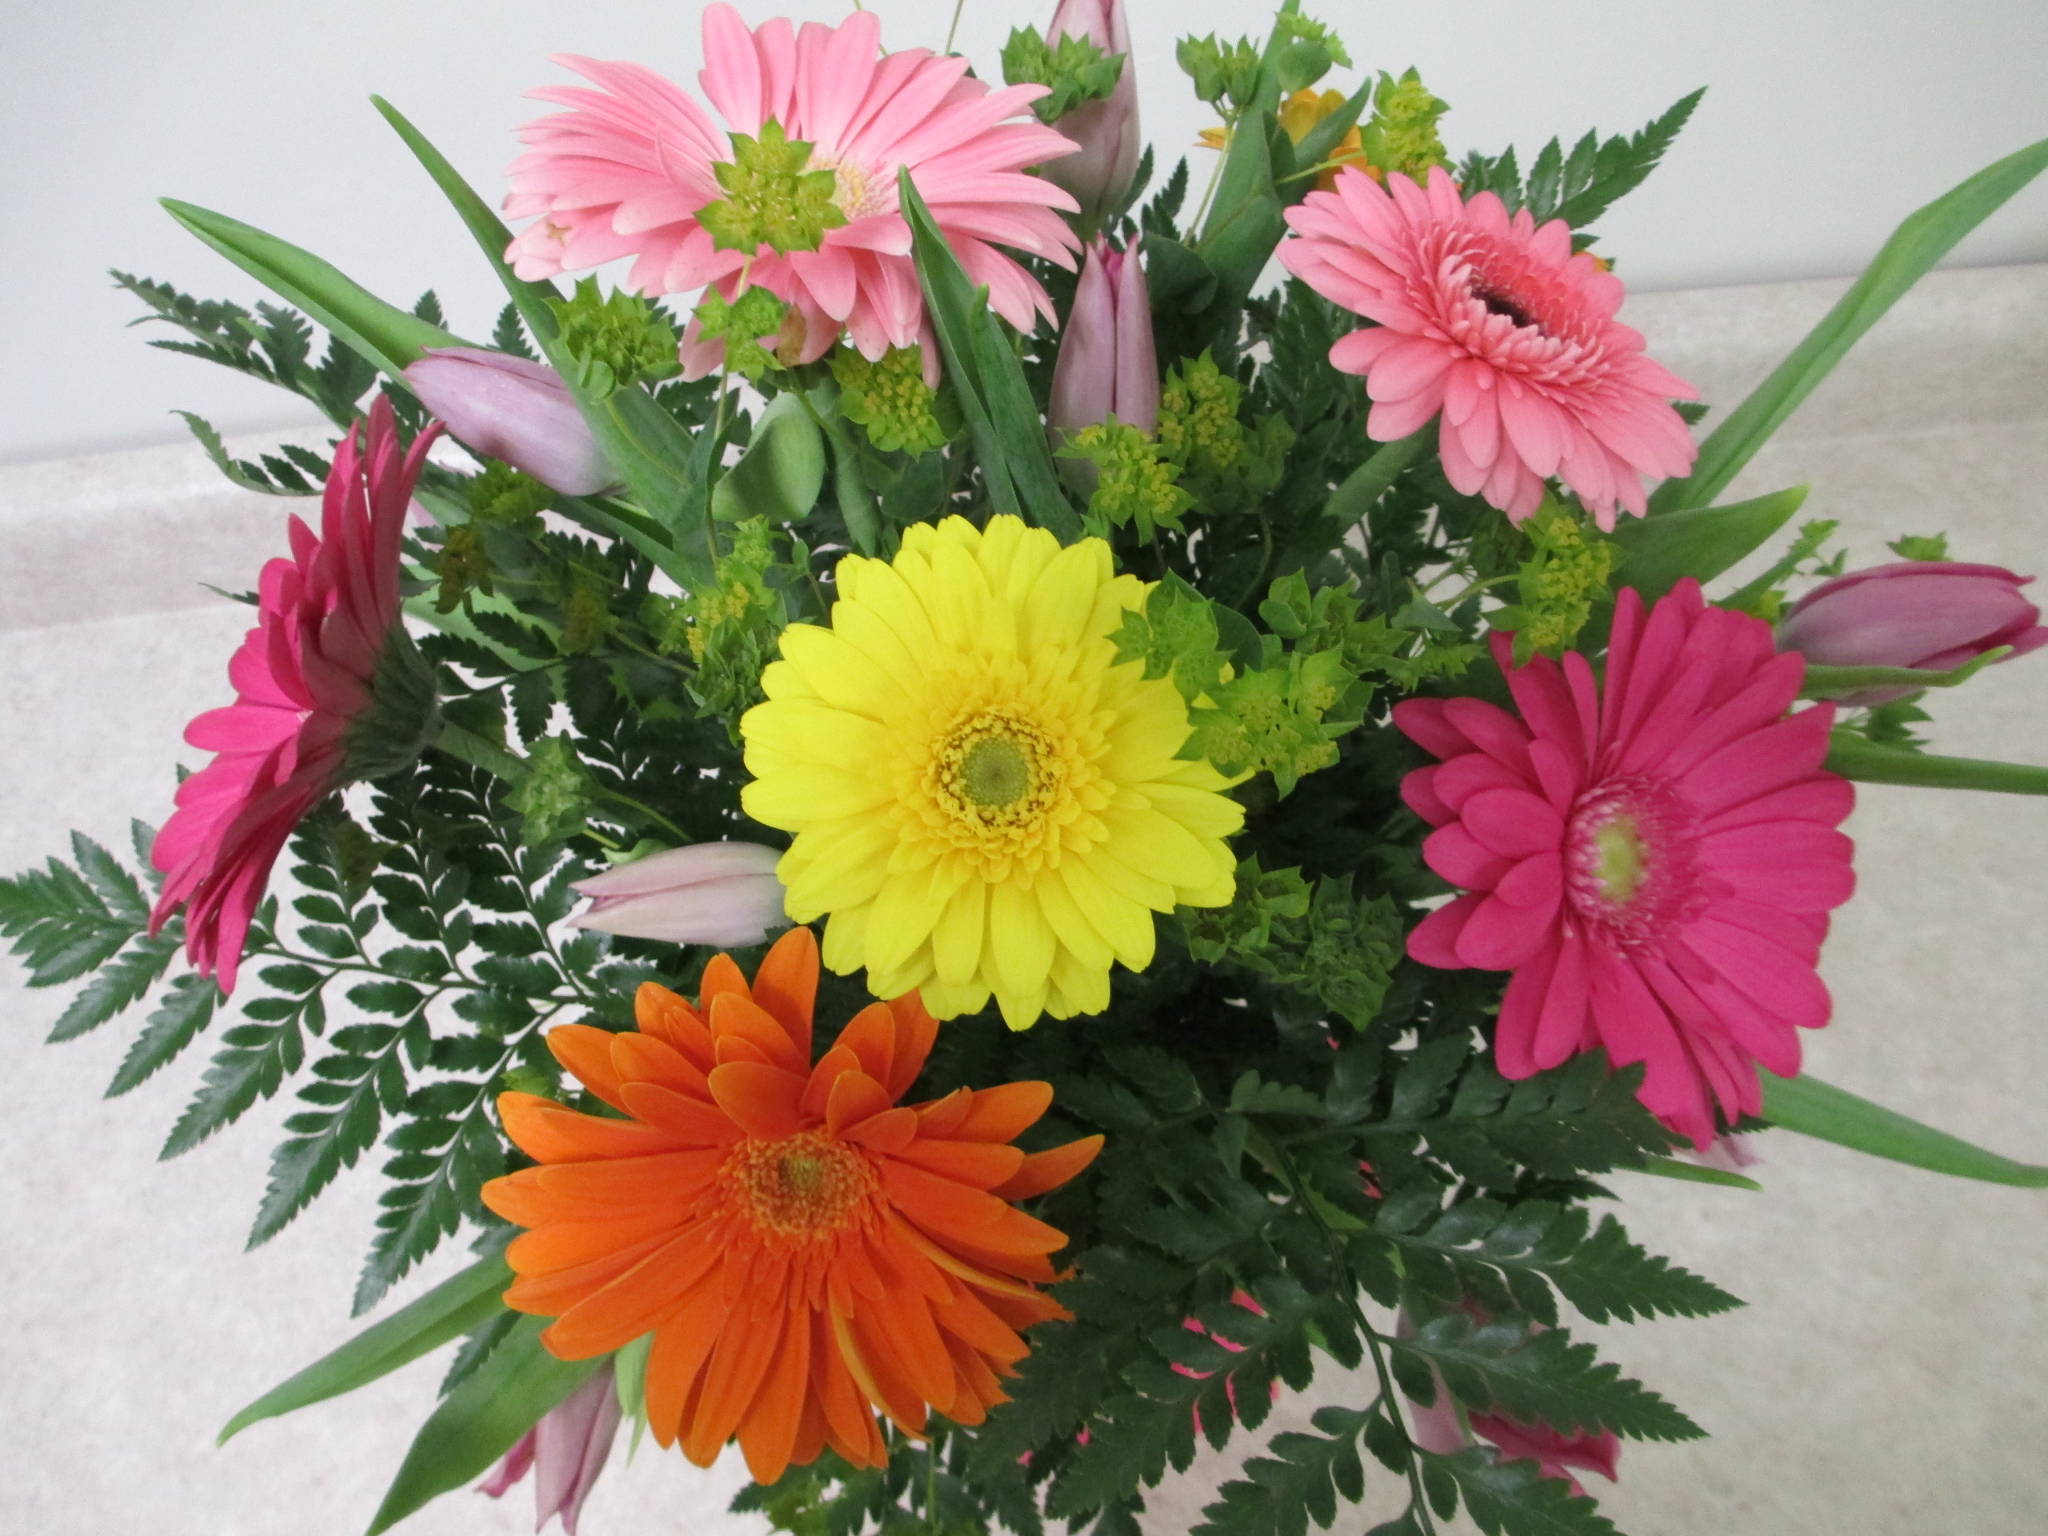 Colorful Gerbera Daisies and Tulips - Forget-Me-Not